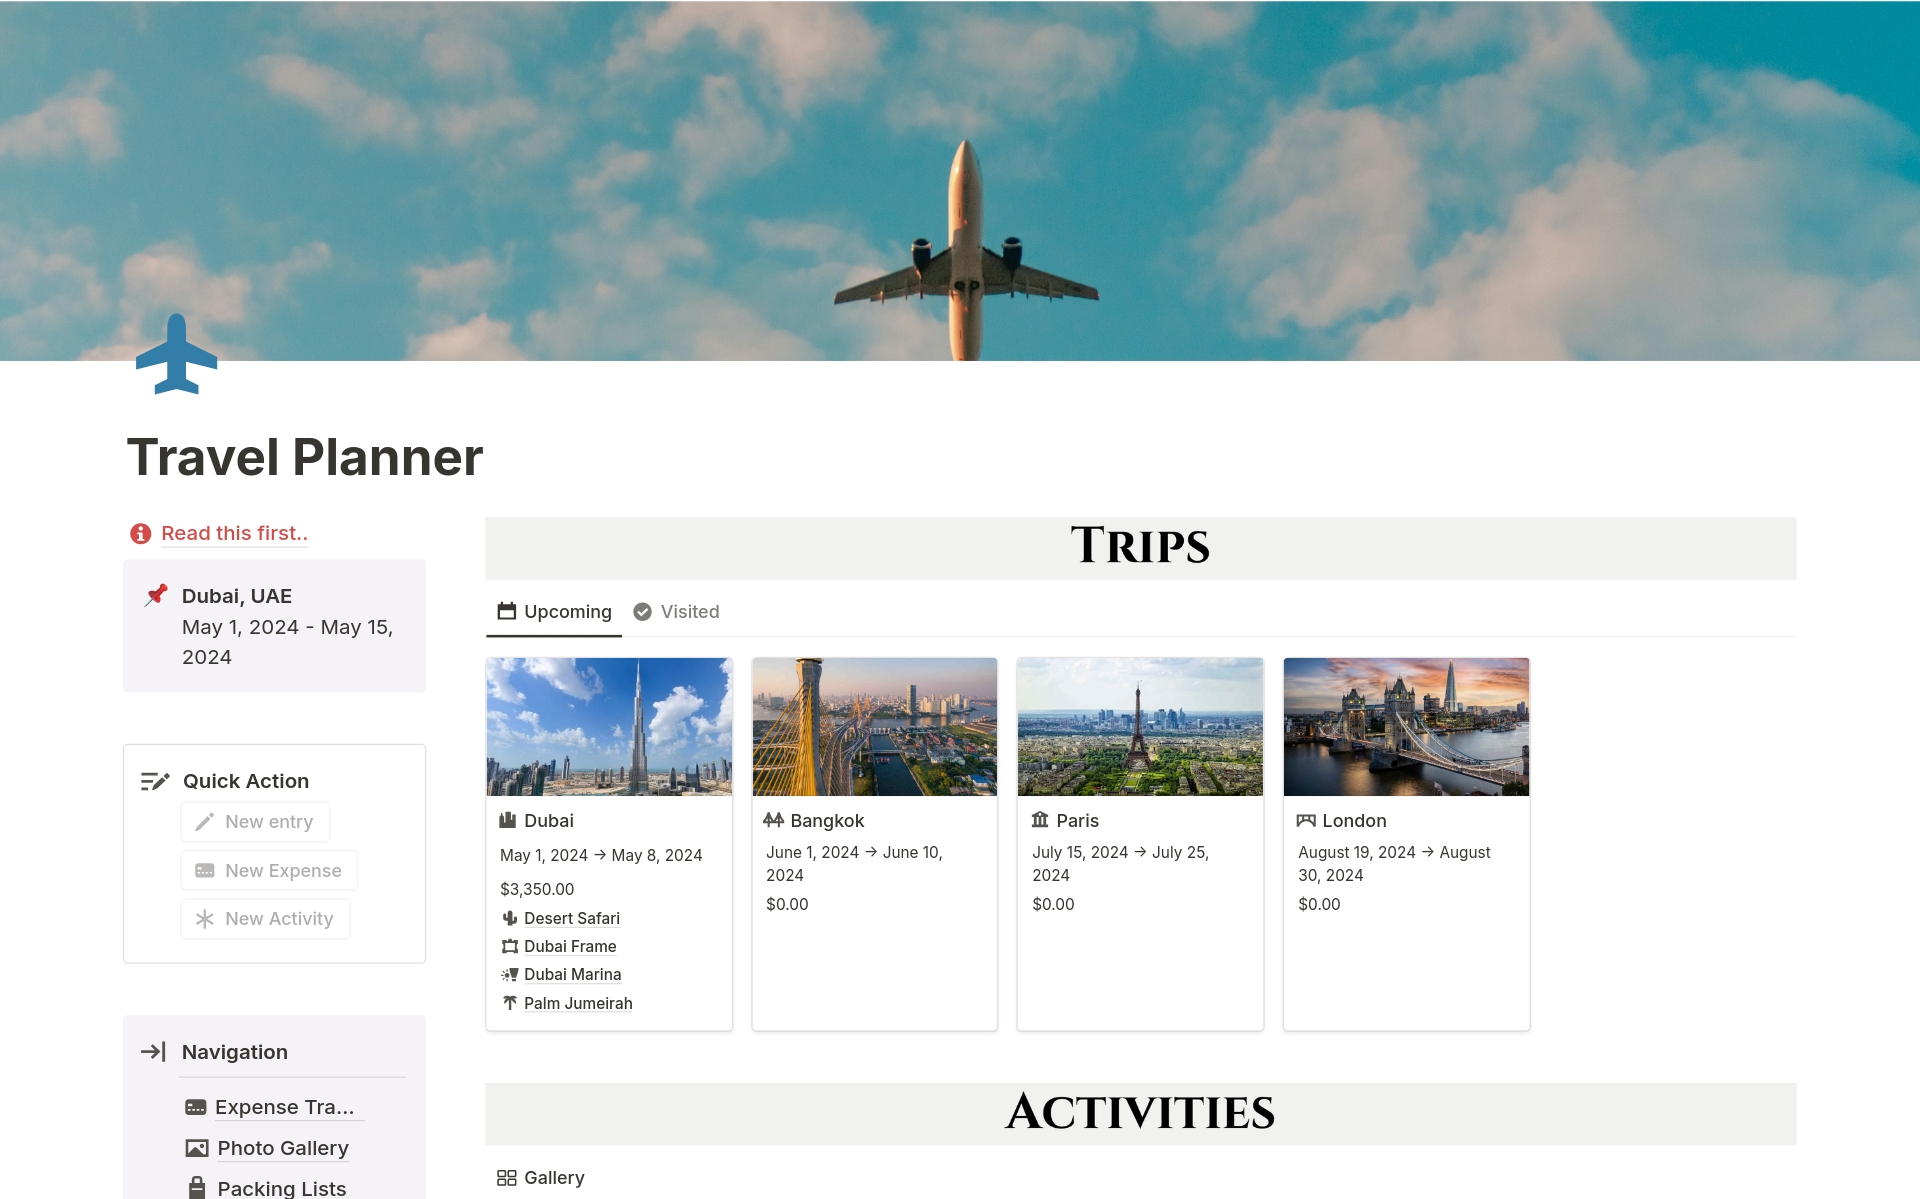 This template can transform your travel planning! Ditch bulky apps, track expenses, photos, journals & packing lists - all on your phone! Manage past, present & future trips with ease. Activities, itineraries, accommodation - it's all here!  Plus, a checklist keeps you prepared.